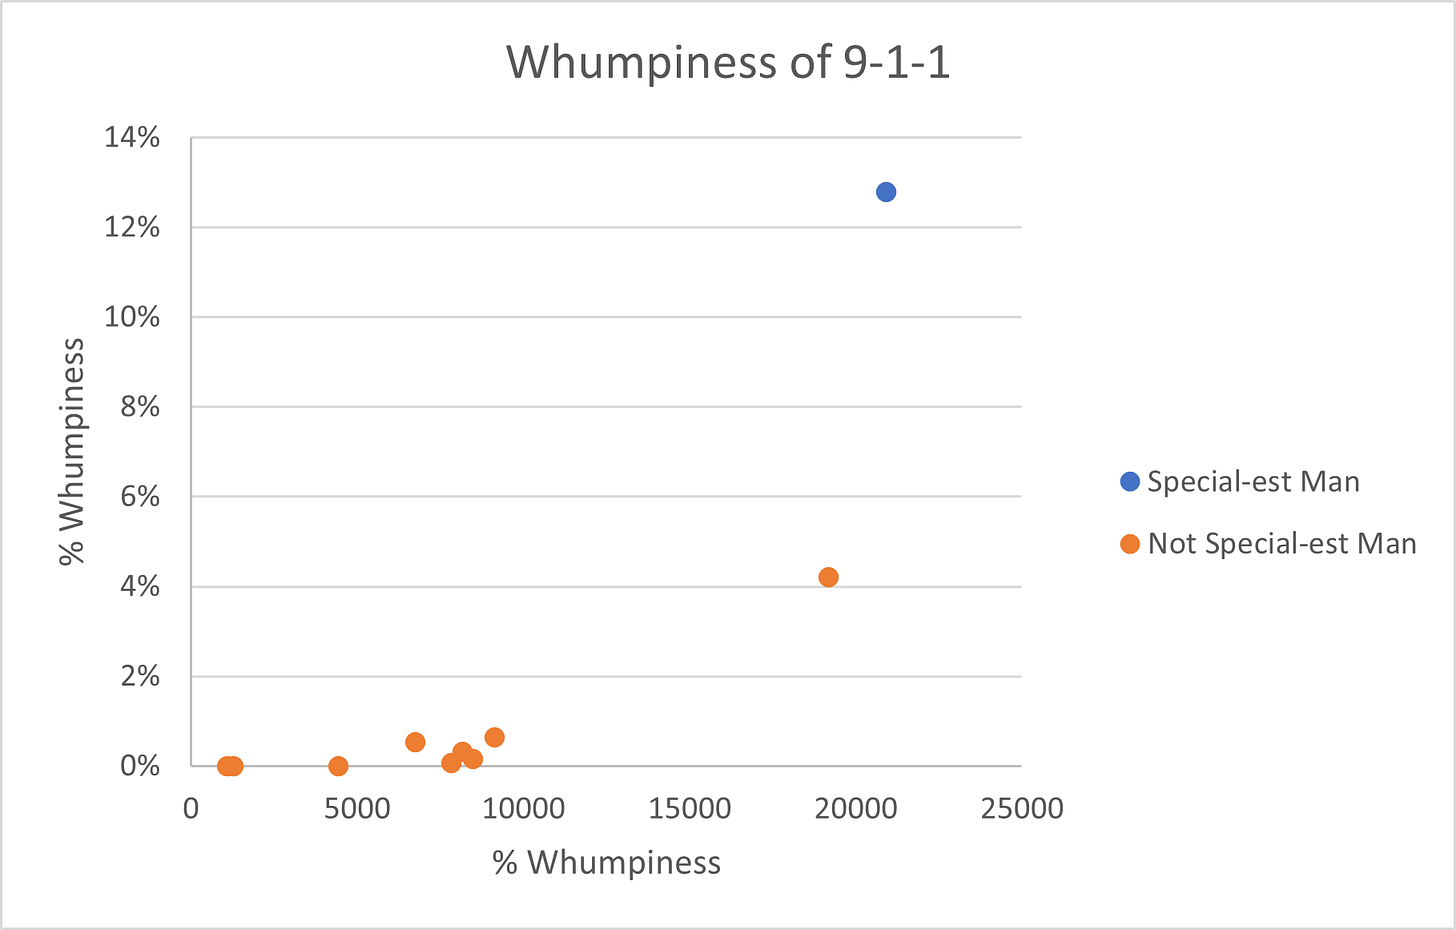 A scatterplot labeled Whumpiness of 9-1-1 with # Fics on the x axis and % Whumpiness on the y axis. The graph has eight orange dots clustered towards the bottom left, as well as one orange dot towards the right and just below the middle of the y axis. The graph has one blue dot that is furthest to the right on the x axis and noticeably higher than the orange dots on the y axis.